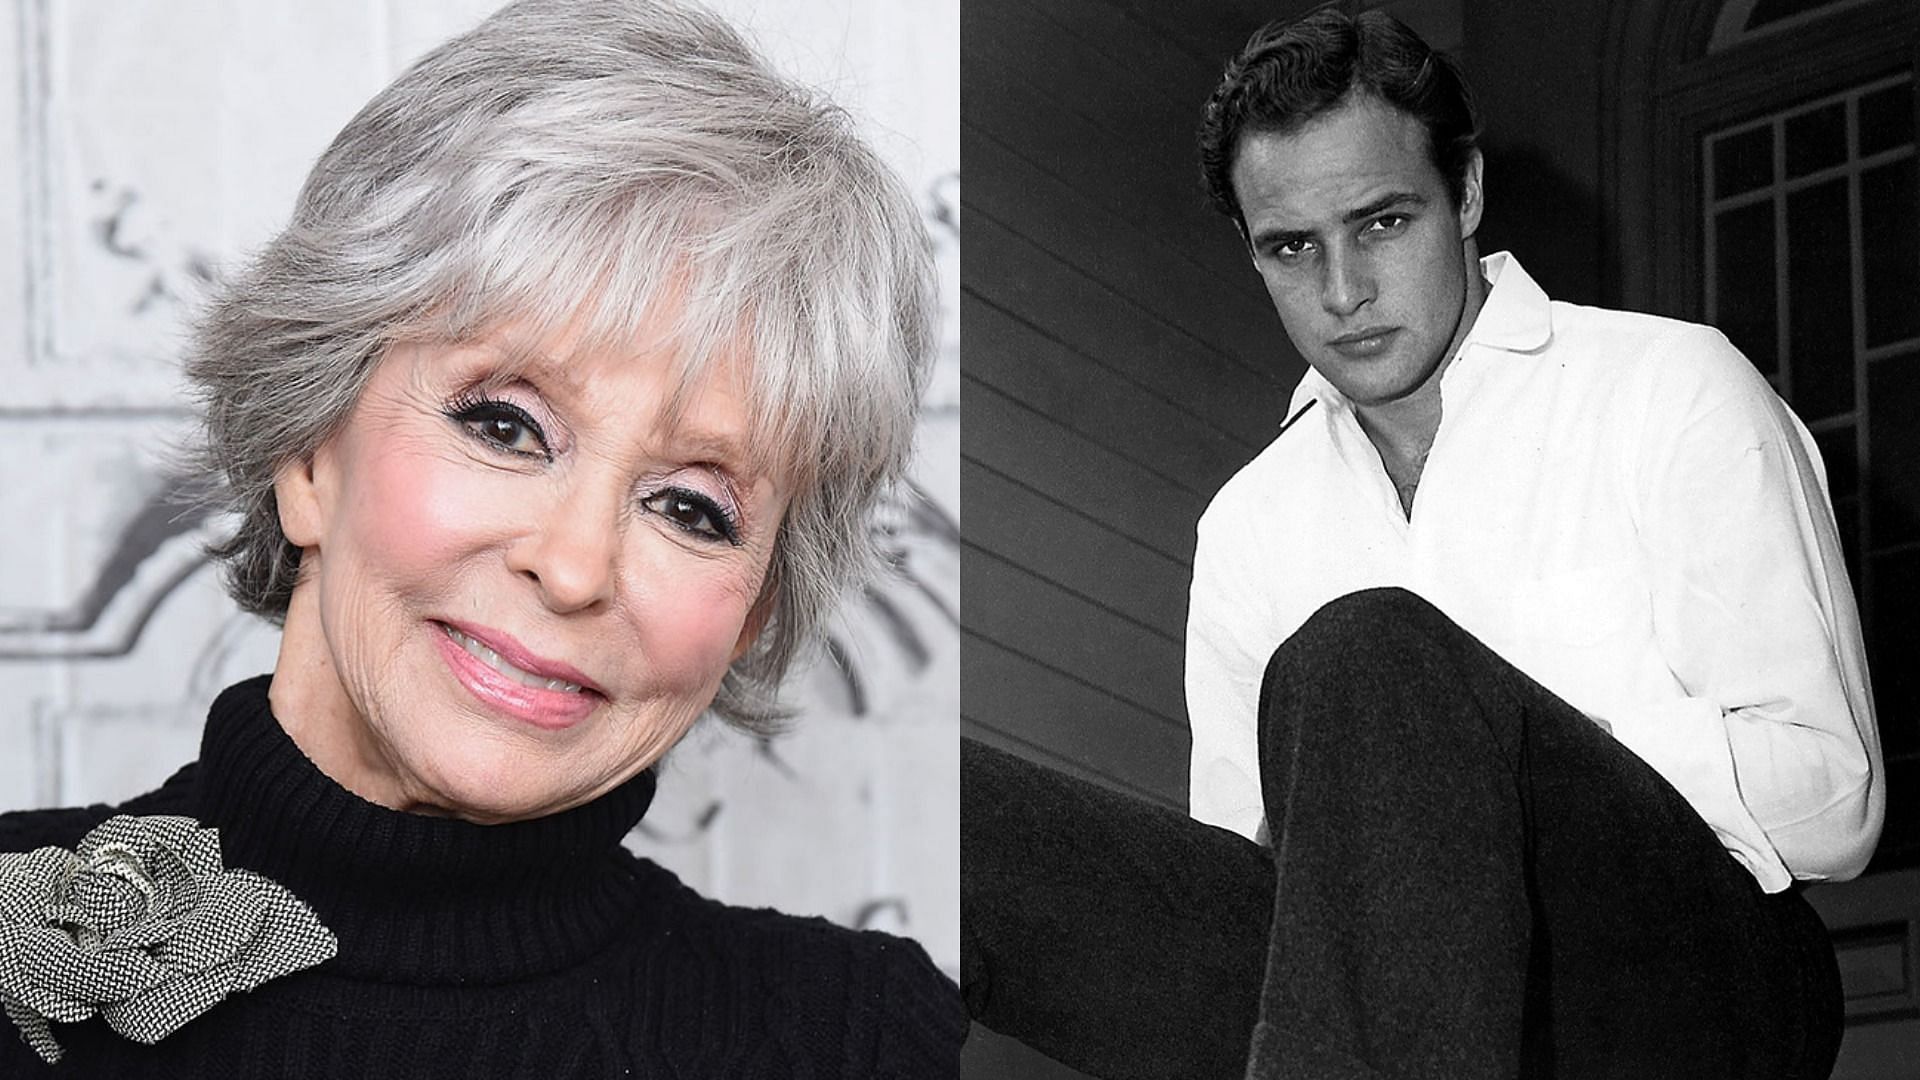 Rita Moreno revealed that she felt suicidal while being in a relationship with Marlon Brando (Image via Getty Images/Gary Gershoff/Michael Ochs Archives)